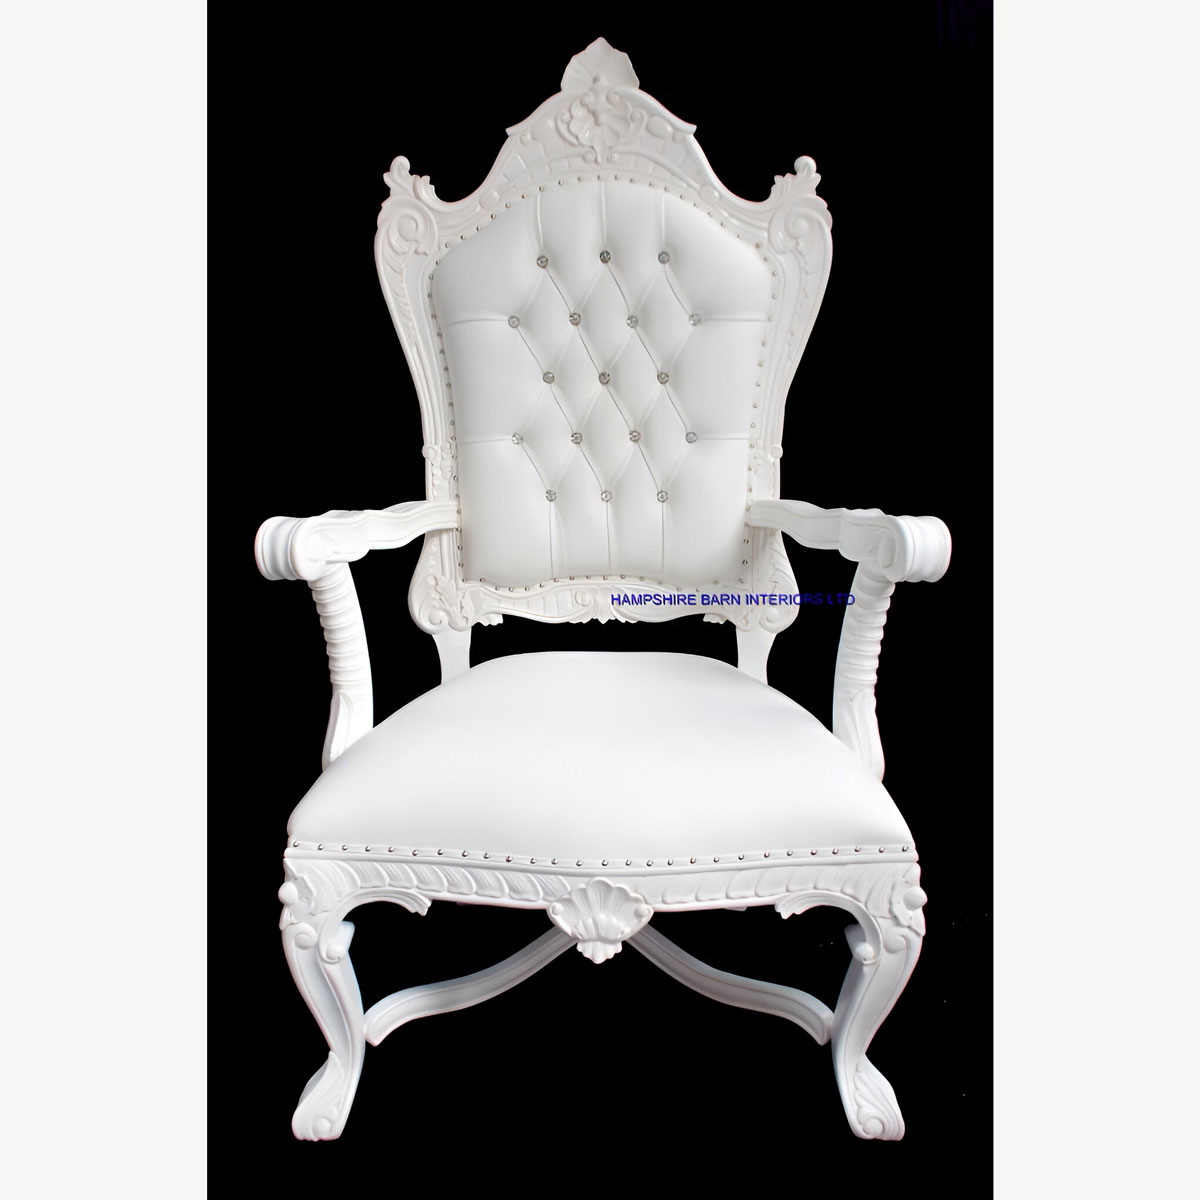 Diamond Trono Ultimo Di Diamante In White And White Faux Leather Upholstery Kings Throne 1 - Hampshire Barn Interiors - About Us -